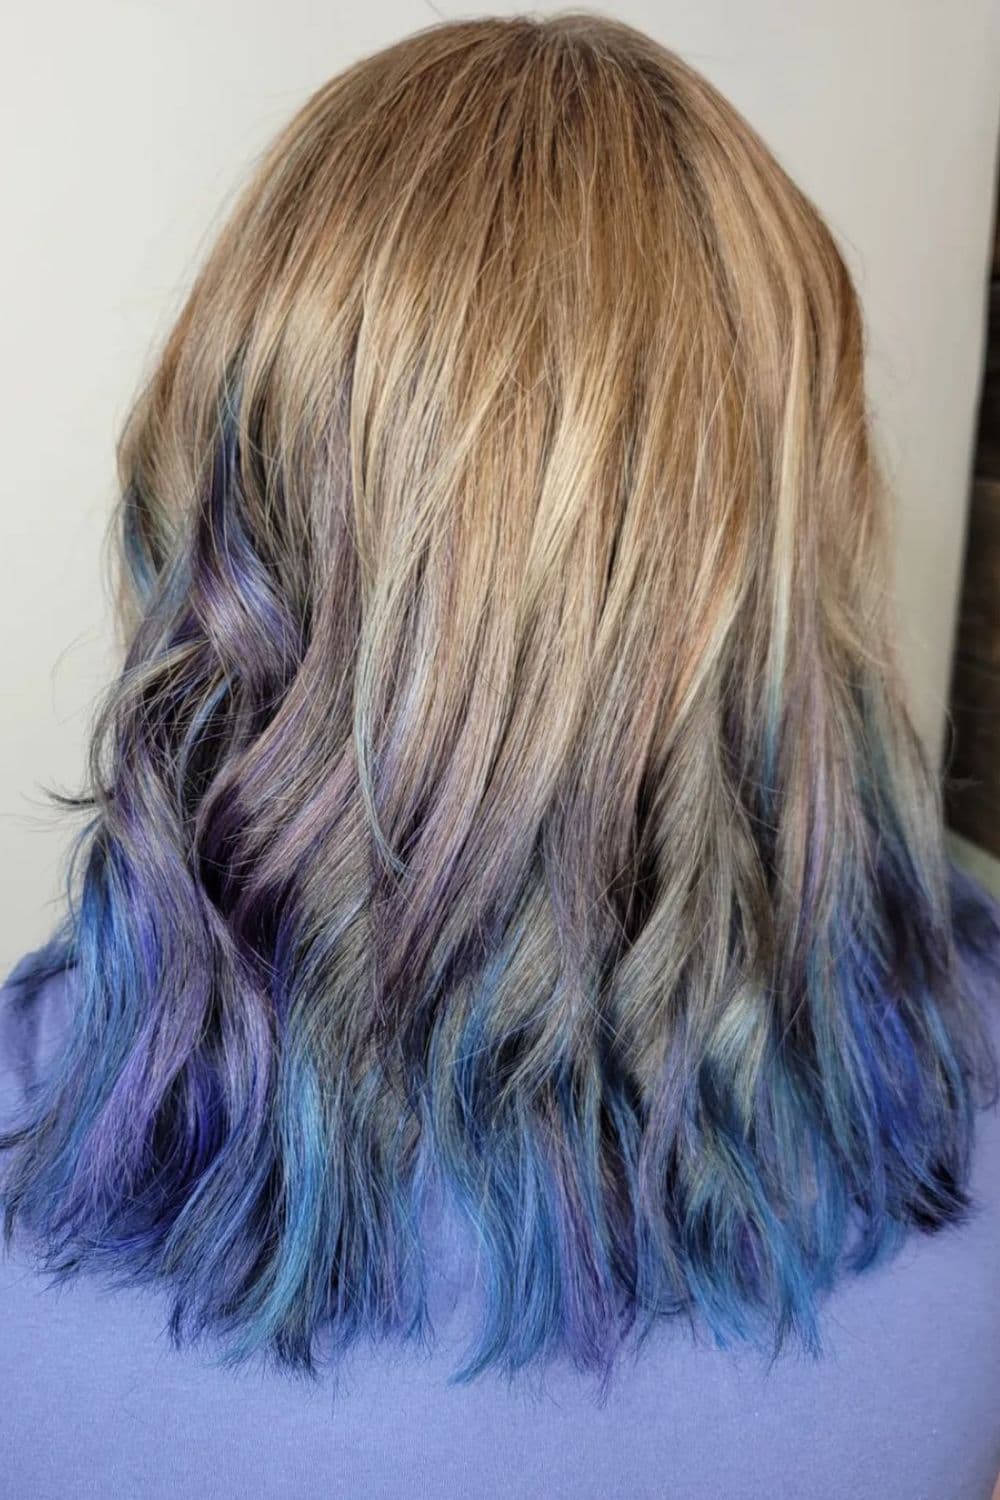 A woman with dip-dyed dirty blonde hair.